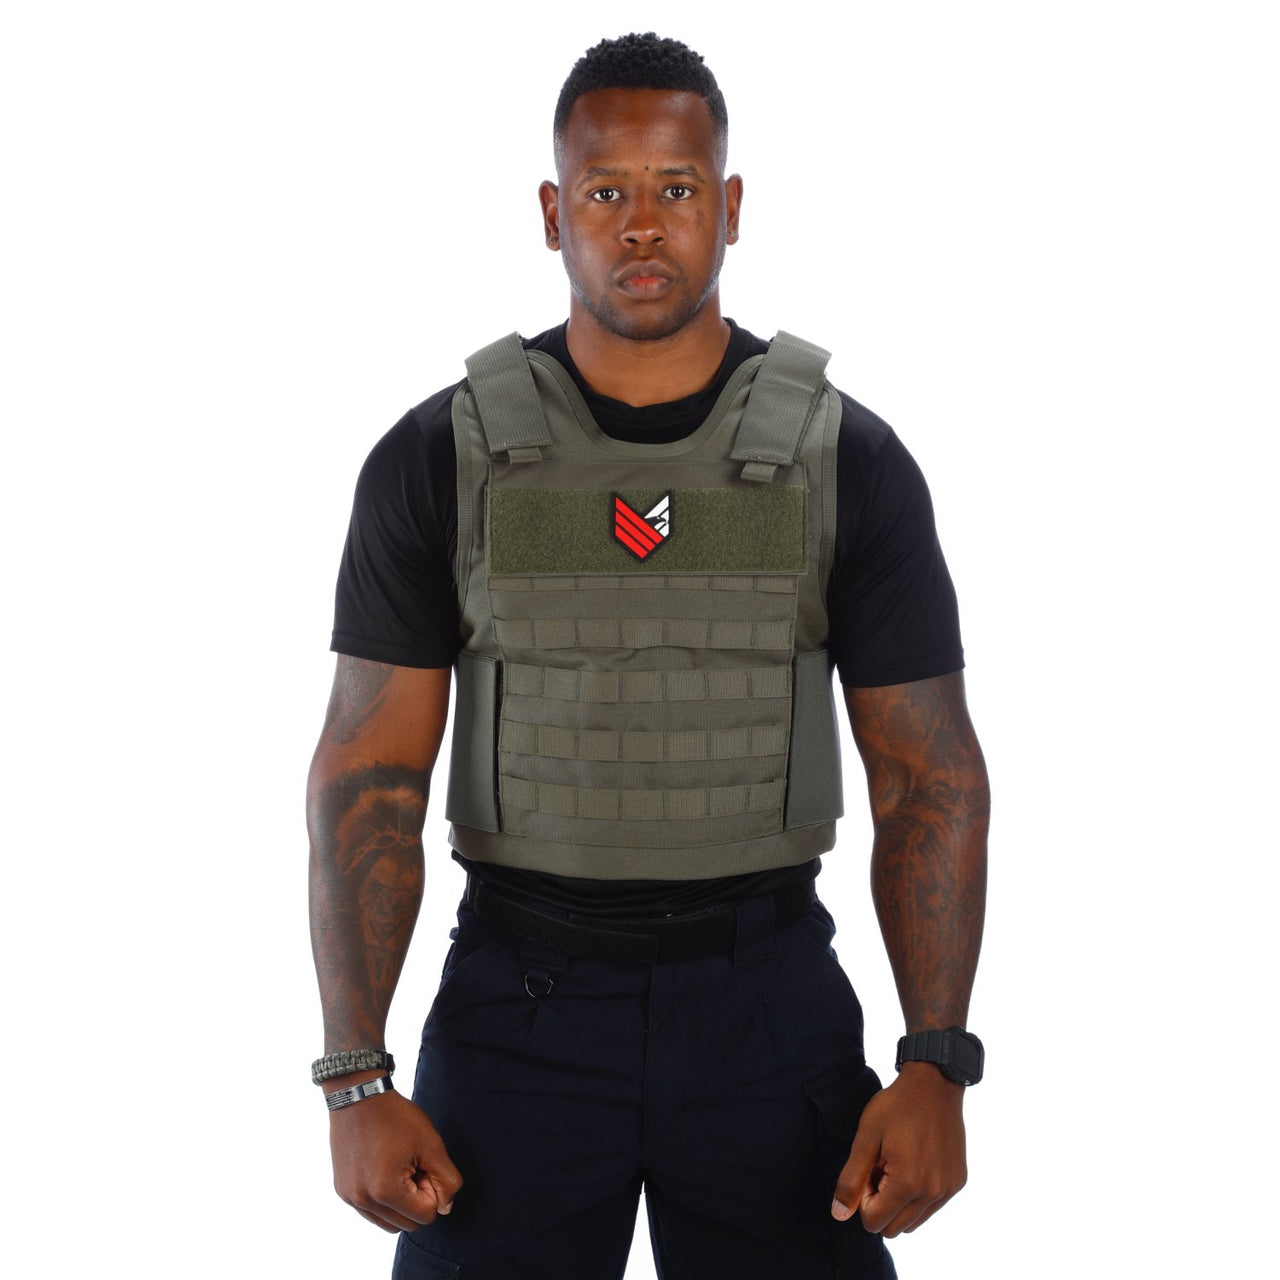 A man wearing a Body Armor Direct All Star Tactical Enhanced Multi-Threat Vest by Body Armor Direct.